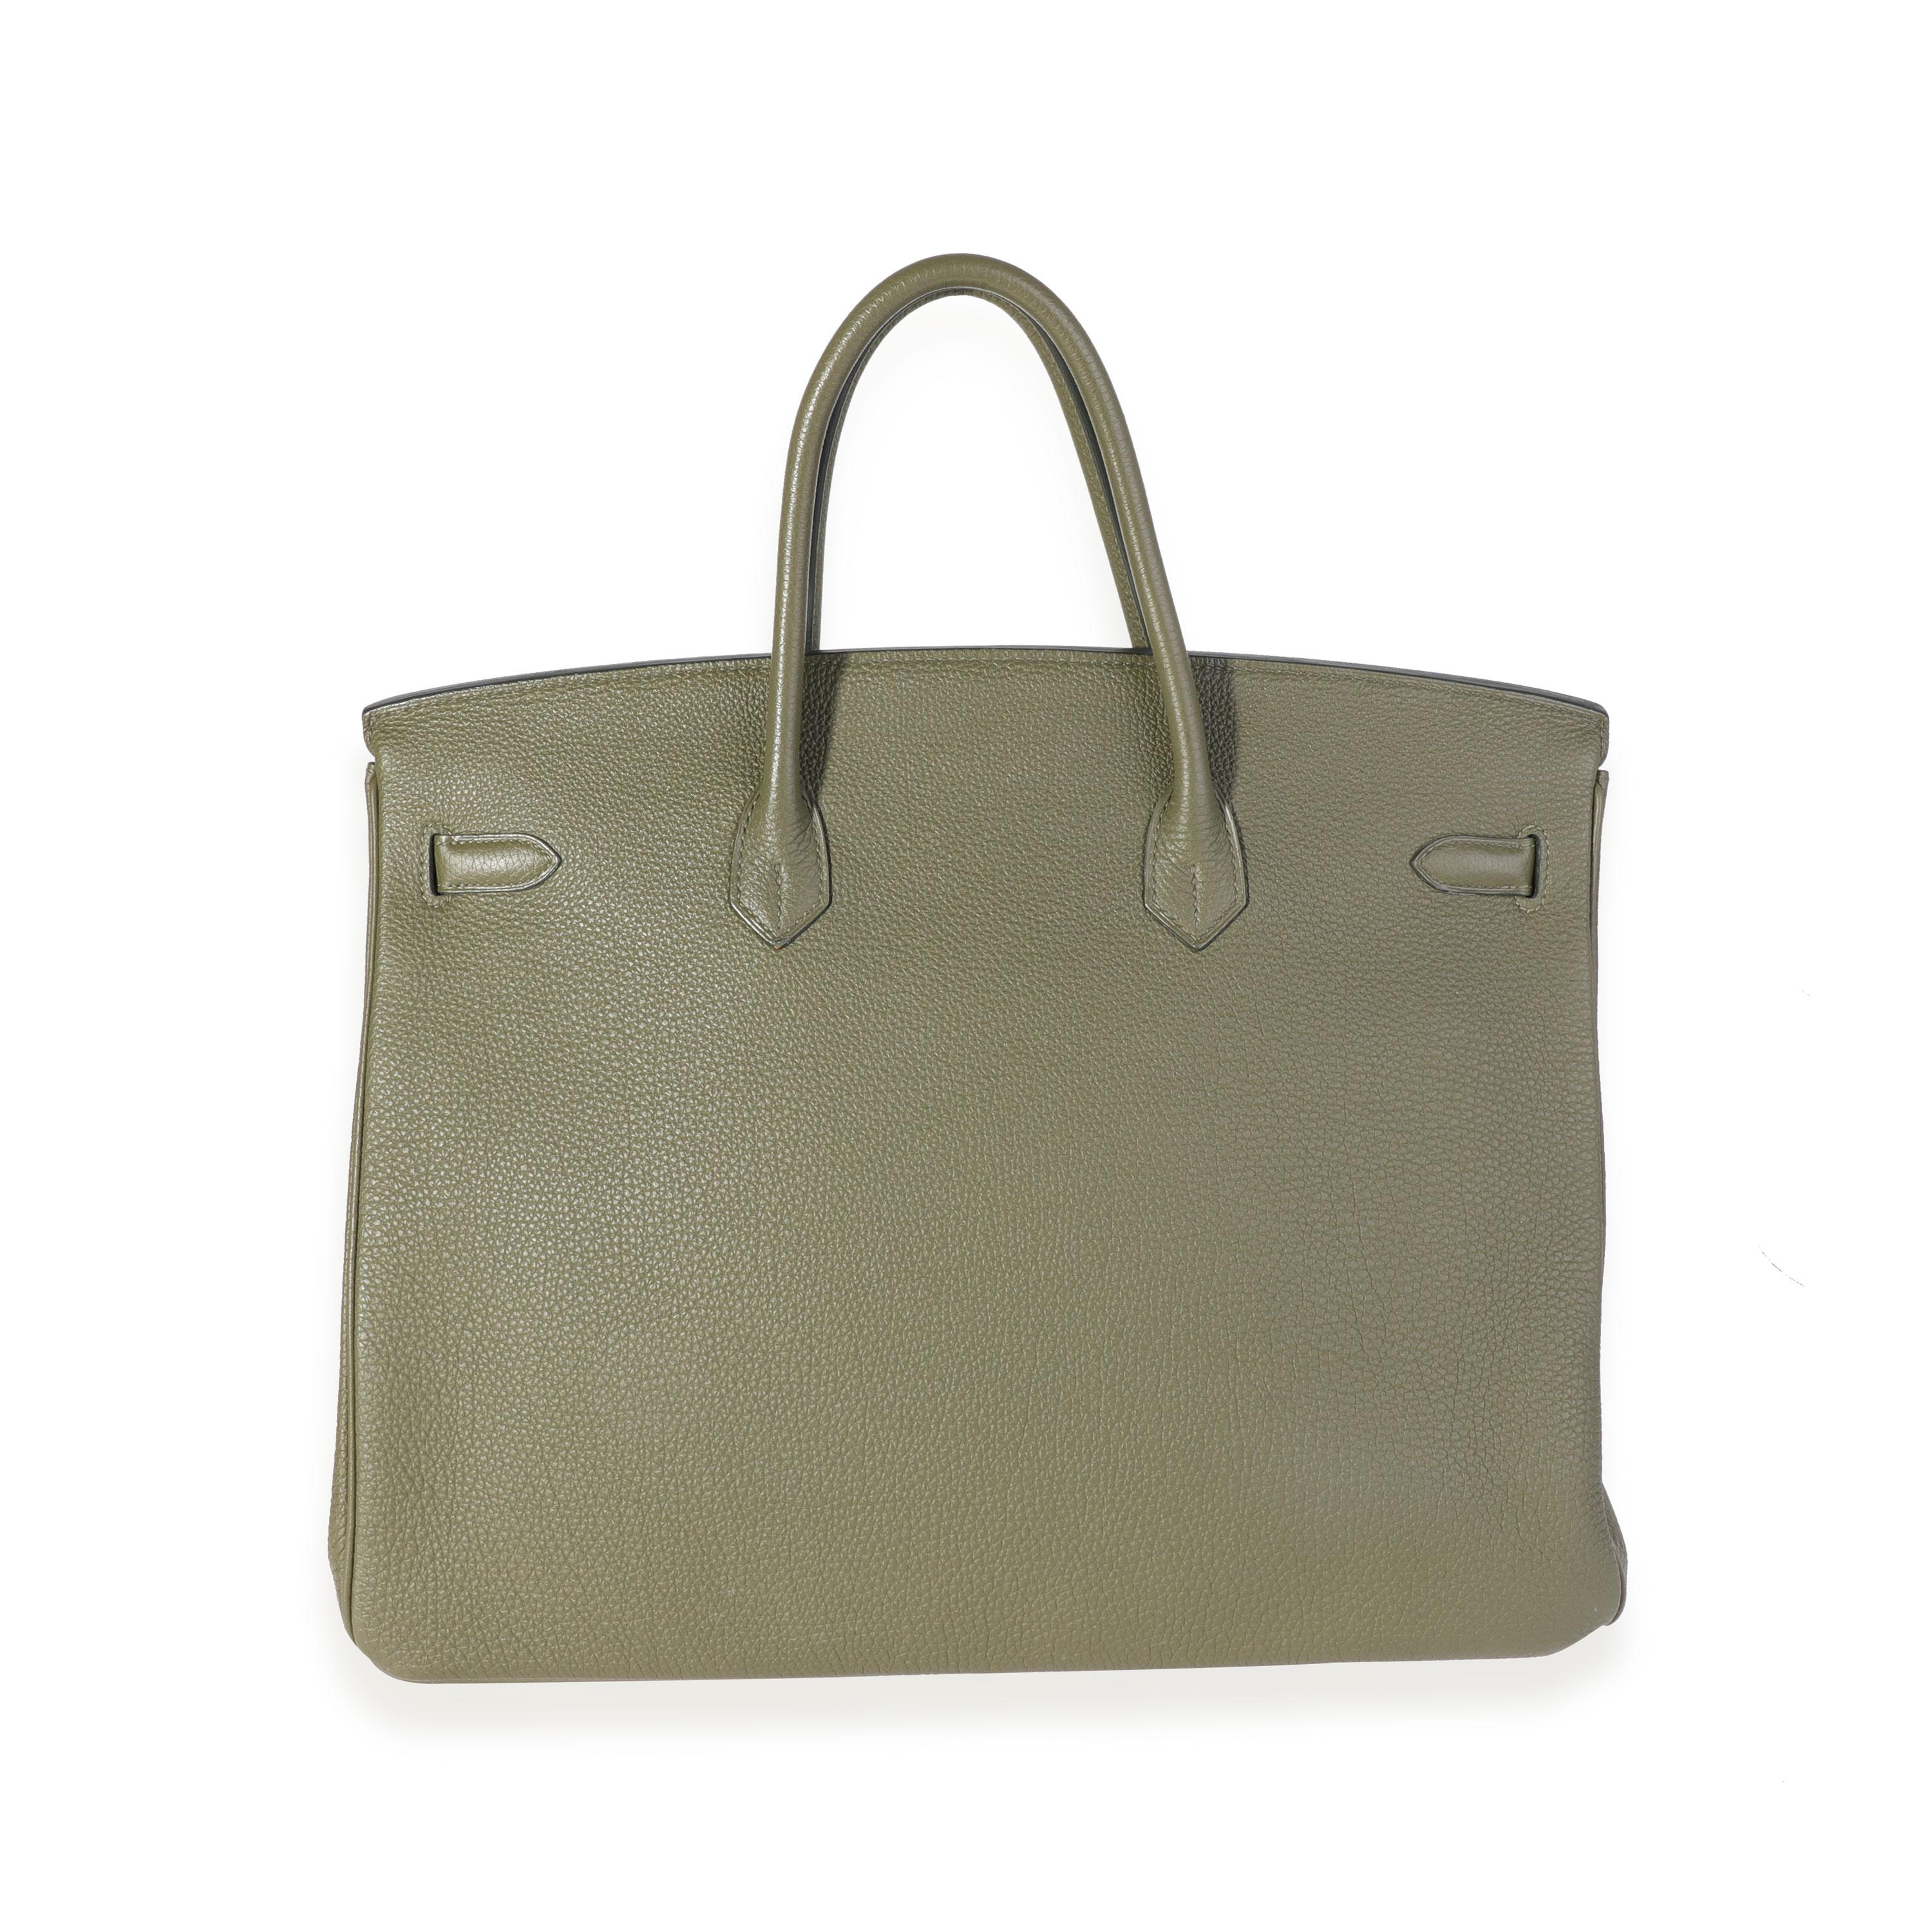 Listing Title: Hermès Vert Veronese Togo Birkin 40 PHW
SKU: 119358
Condition: Pre-owned (3000)
Handbag Condition: Very Good
Condition Comments: Very Good Condition. Plastic on some hardware. Light scuffing to corners. Light marks to exterior